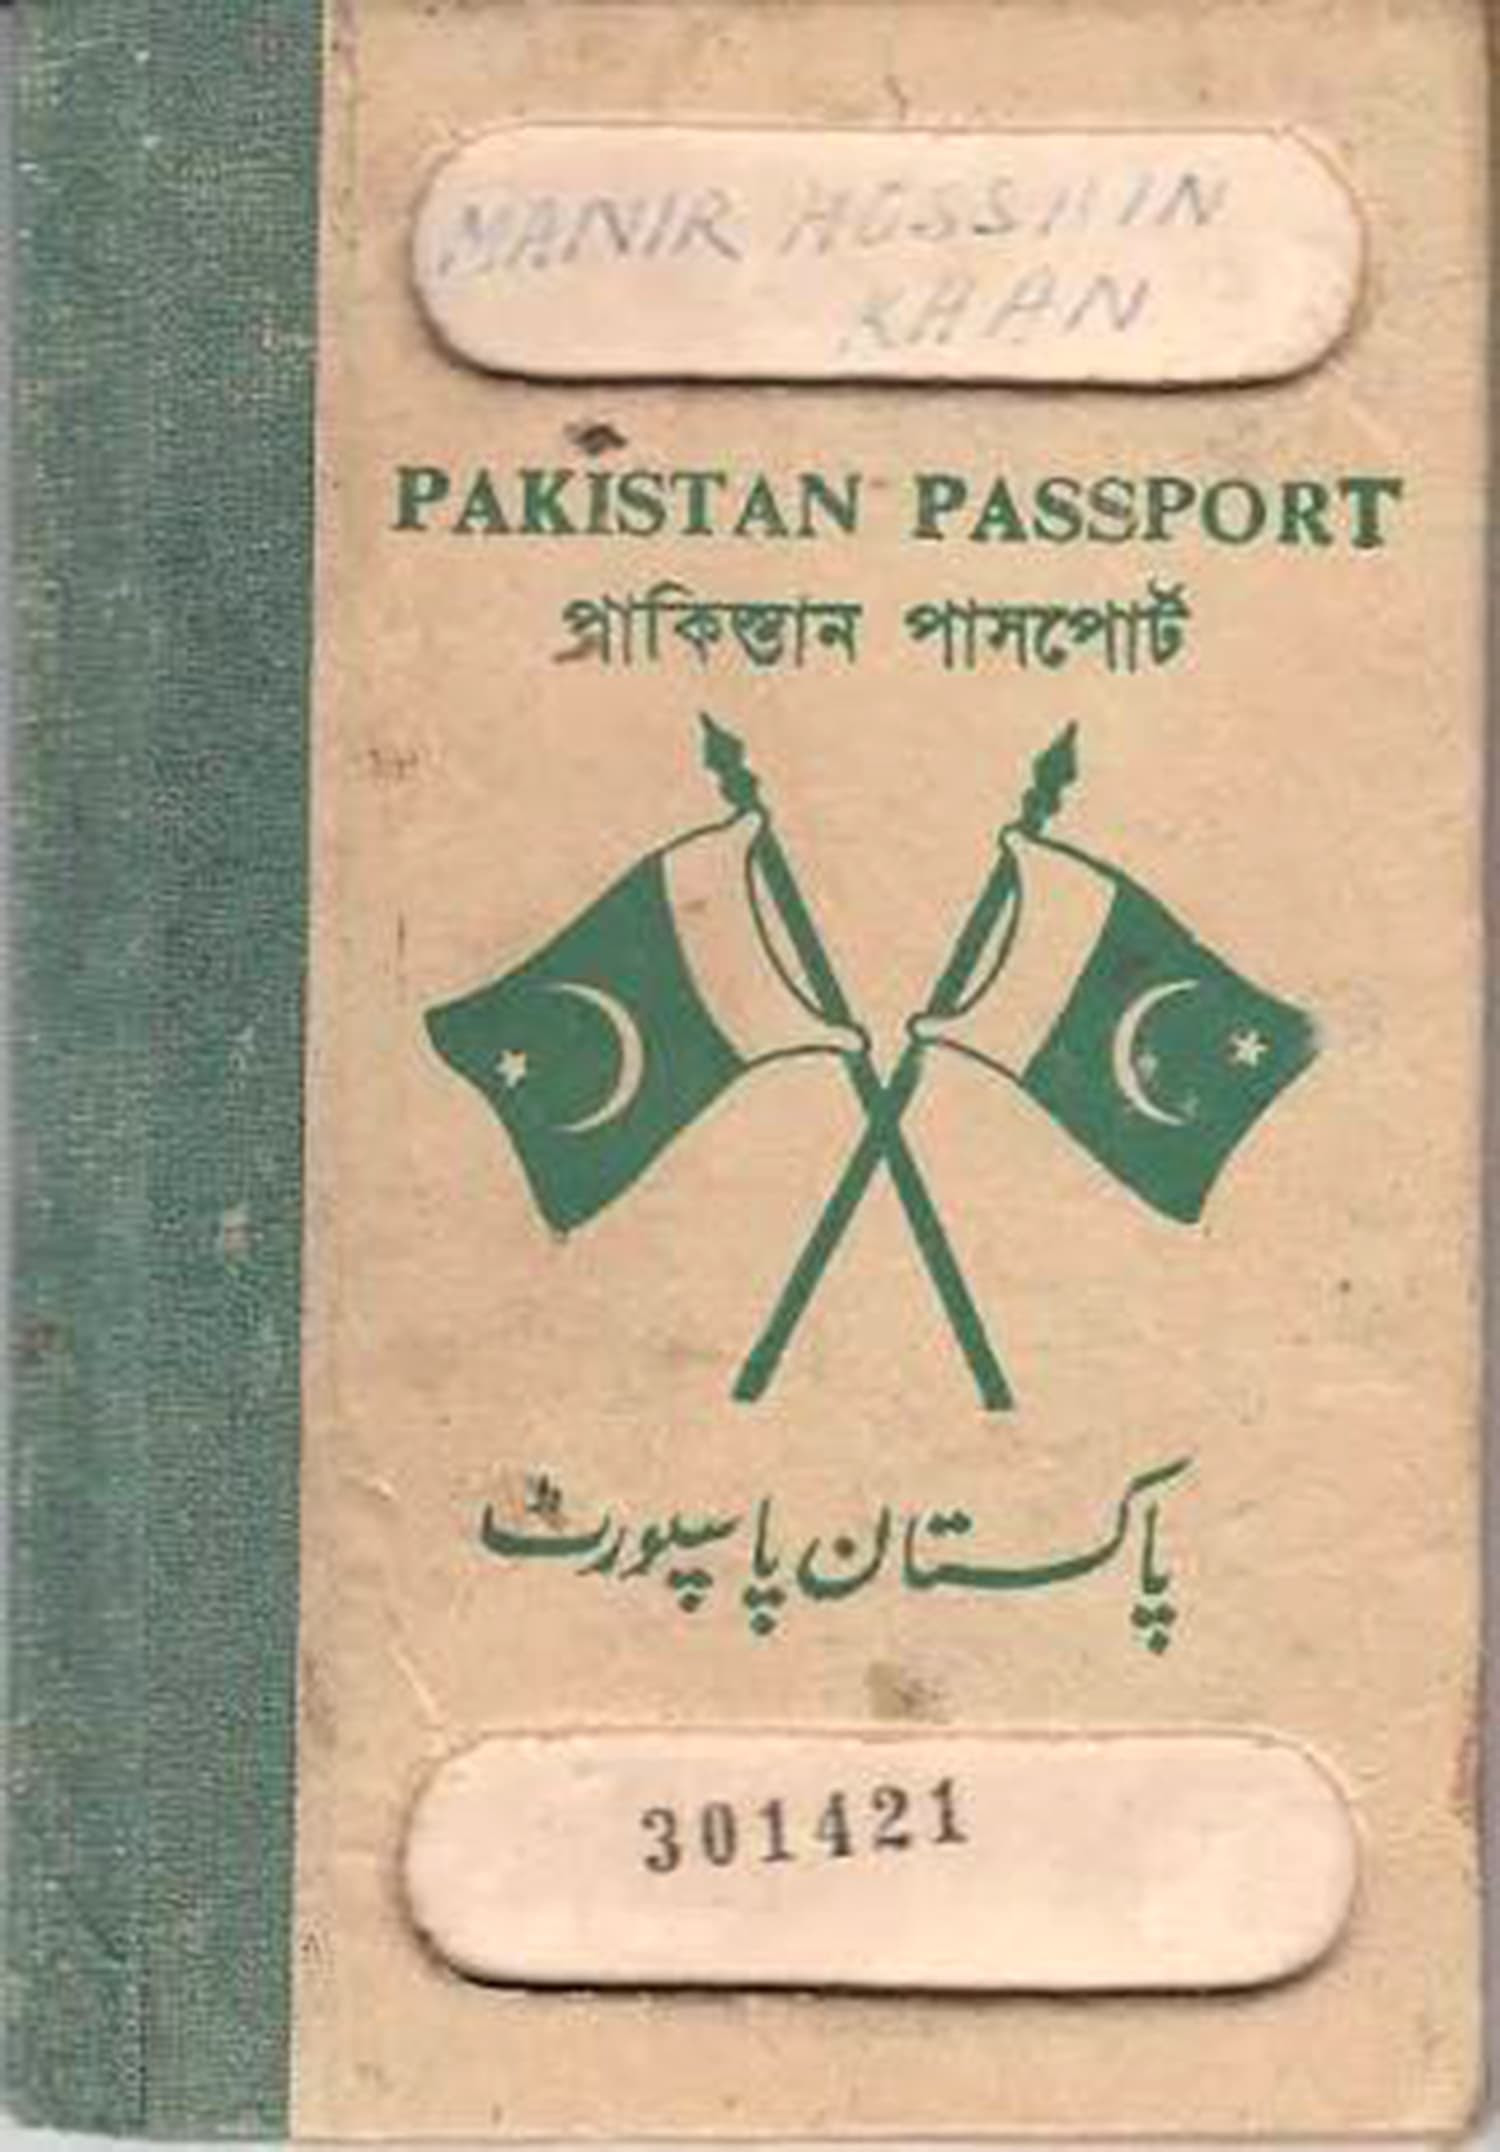 The cover of Pakistan's first passport